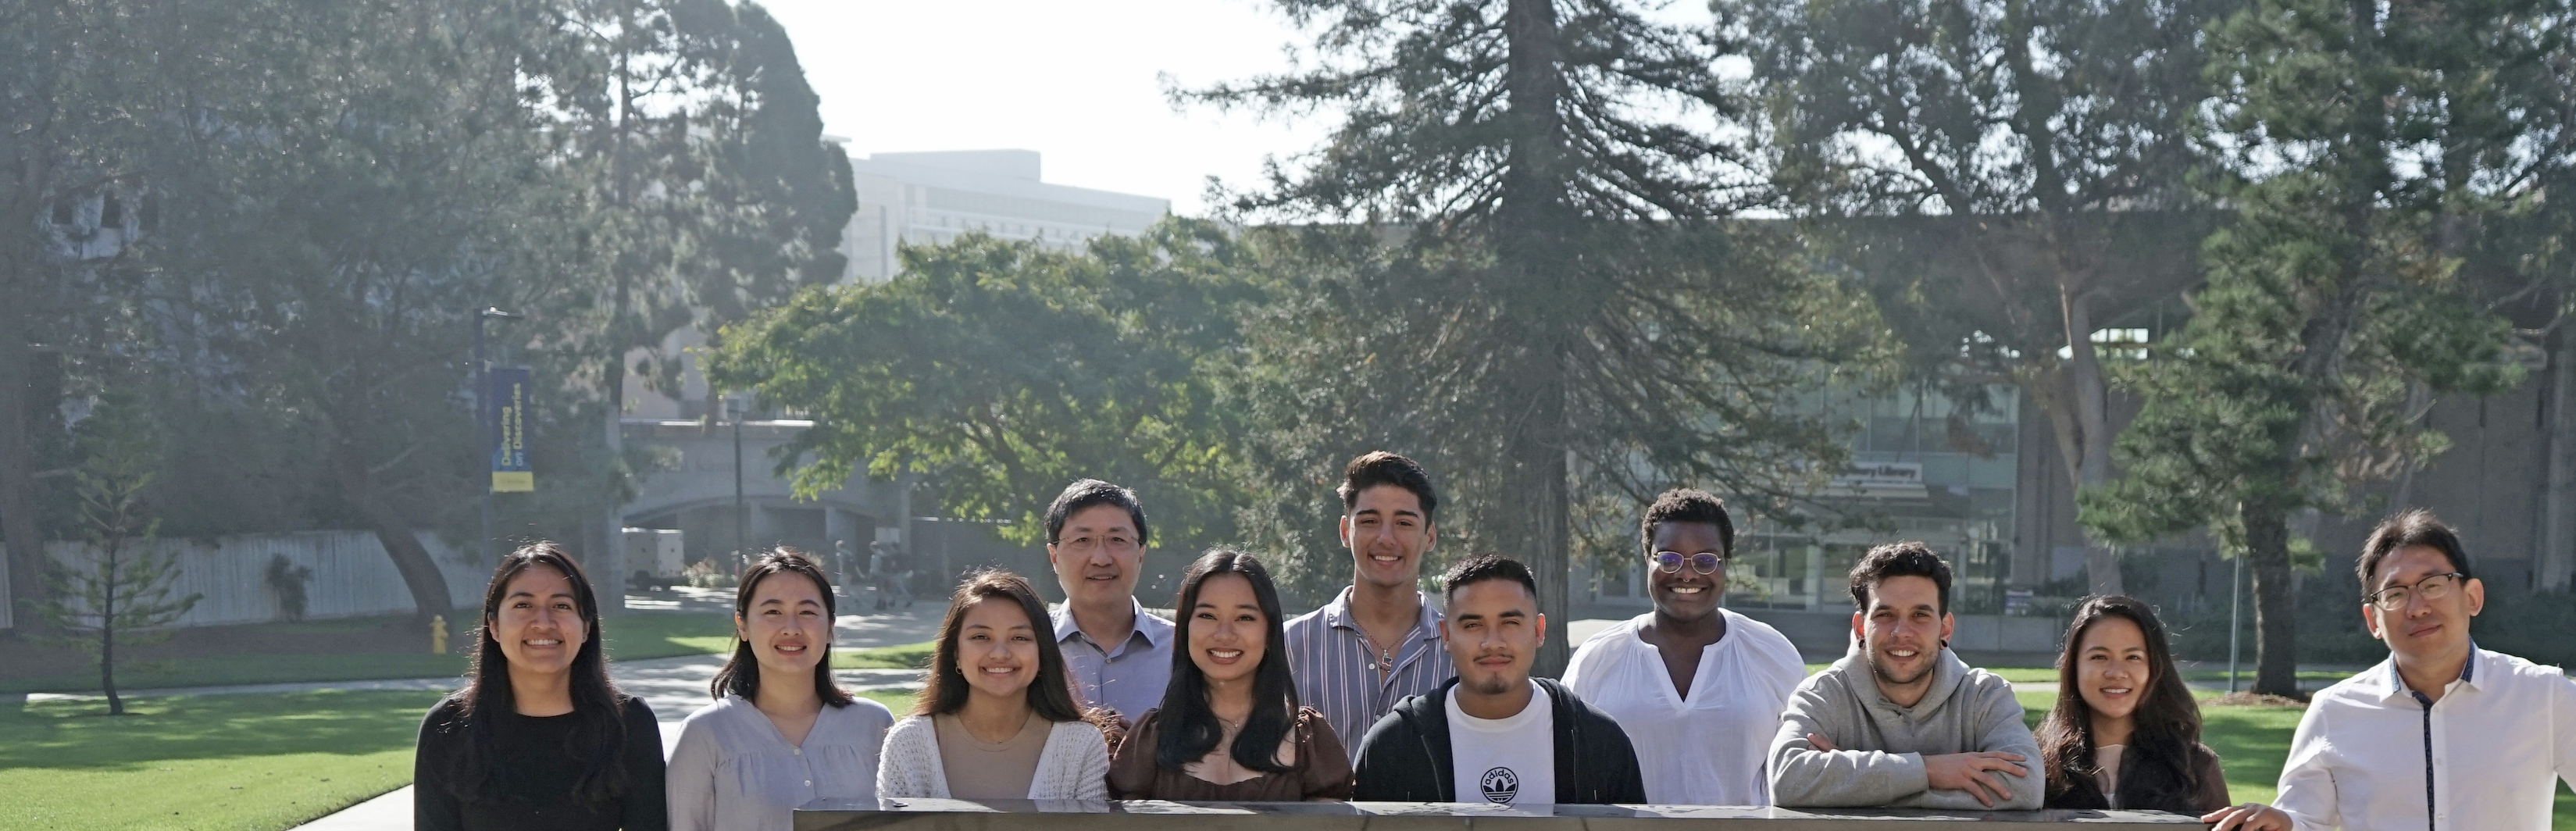 zheng lab members standing outside in front of the leichtag biomedical research building sign